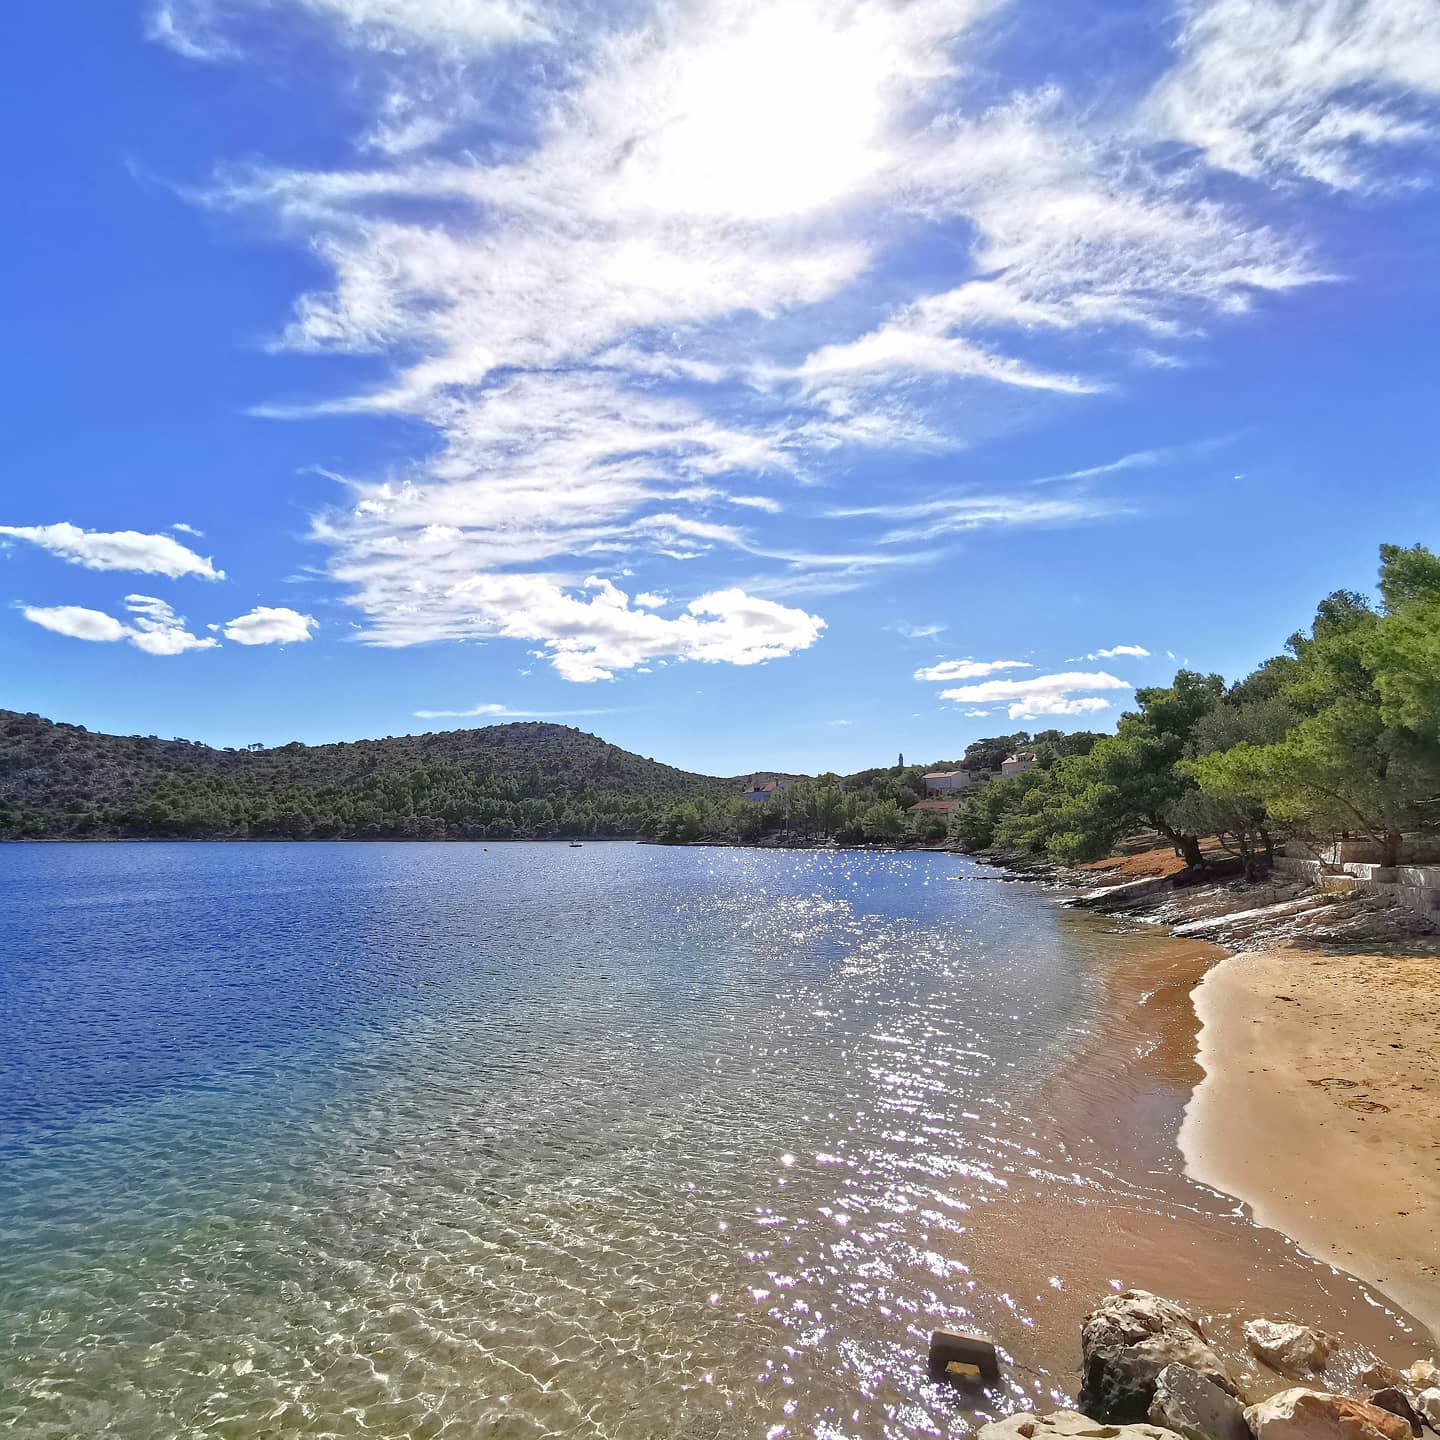 Skrivena Luka beach earned its "hidden" title without competition